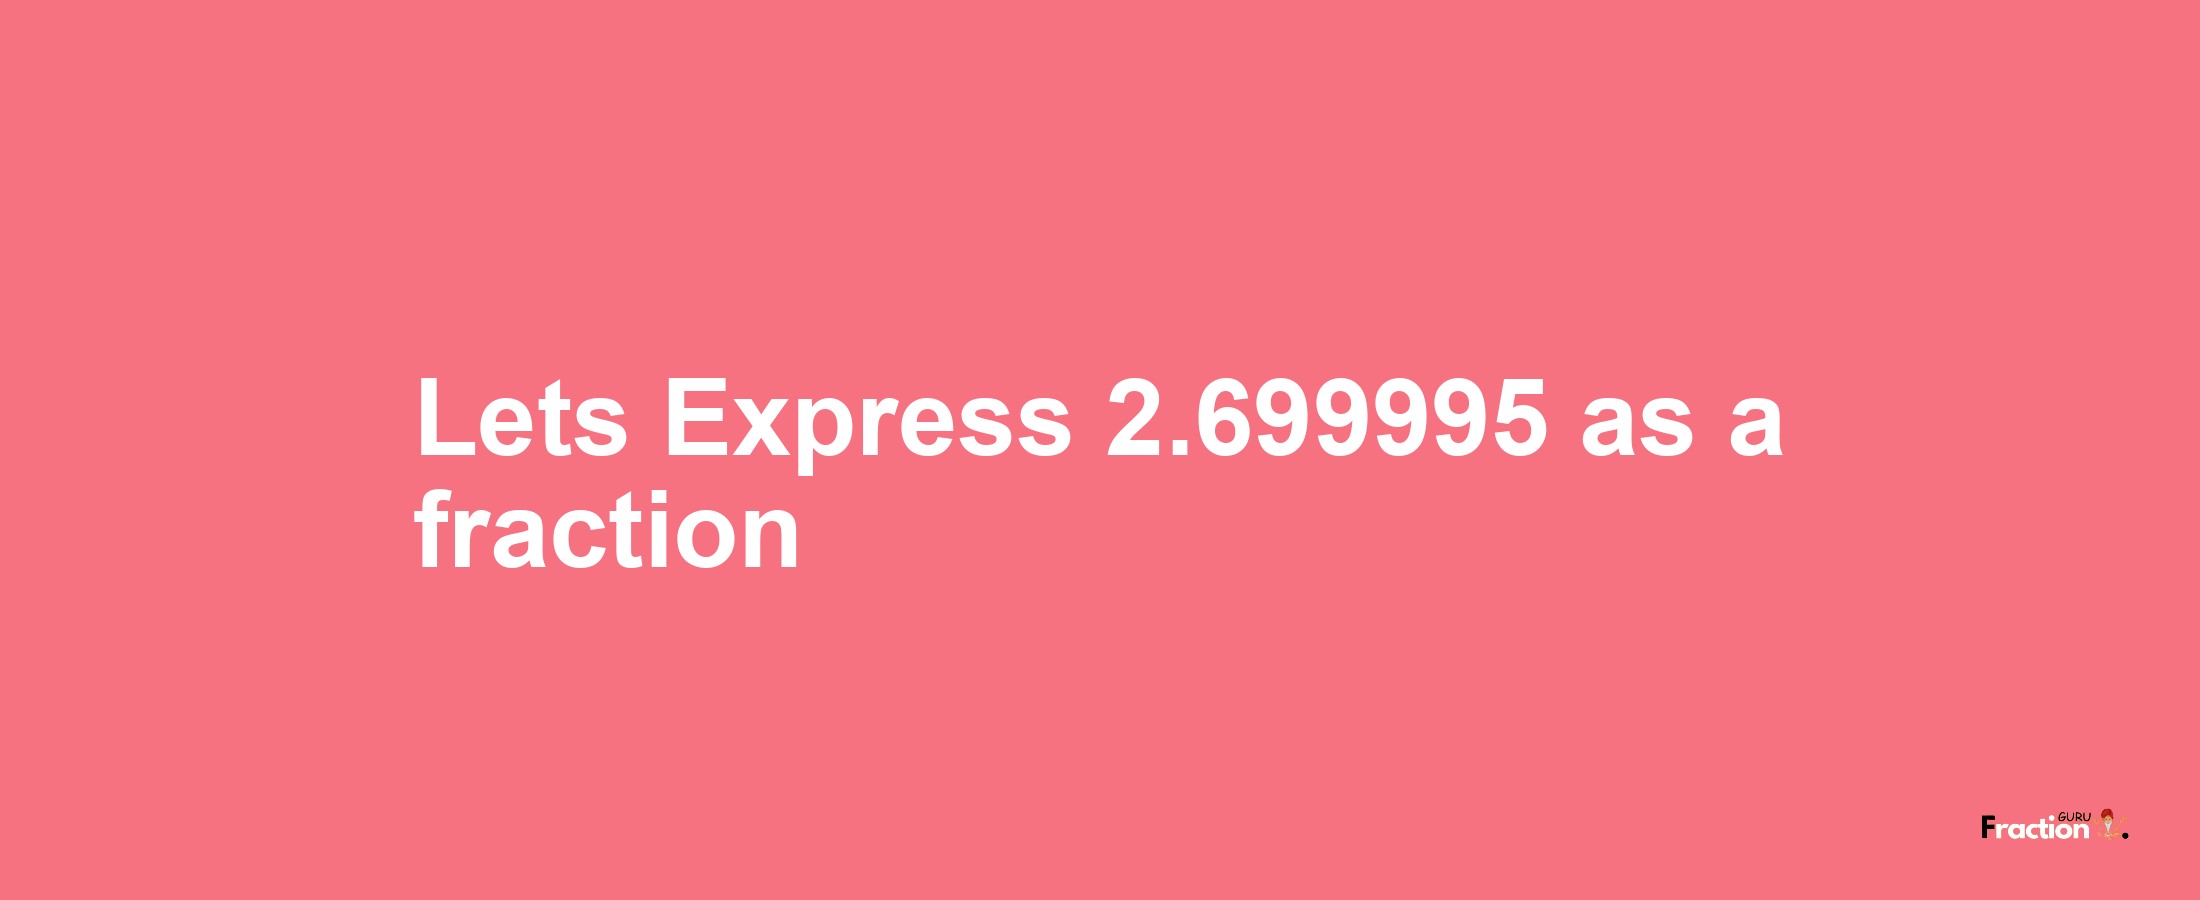 Lets Express 2.699995 as afraction